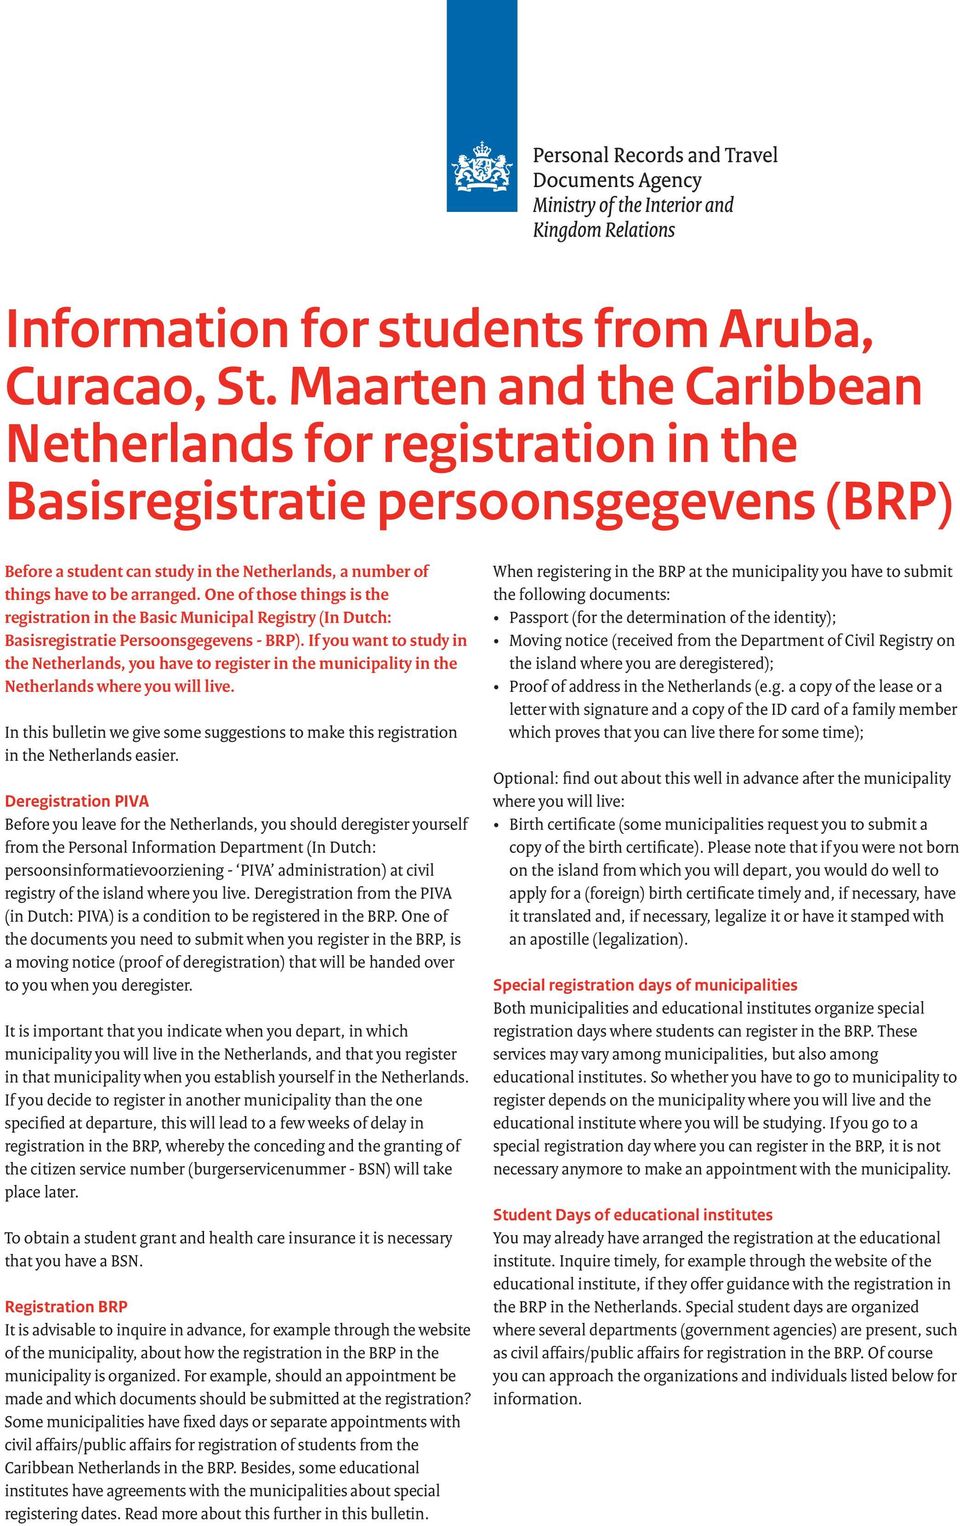 One of those things is the registration in the Basic Municipal Registry (In Dutch: Basisregistratie Persoonsgegevens - BRP).